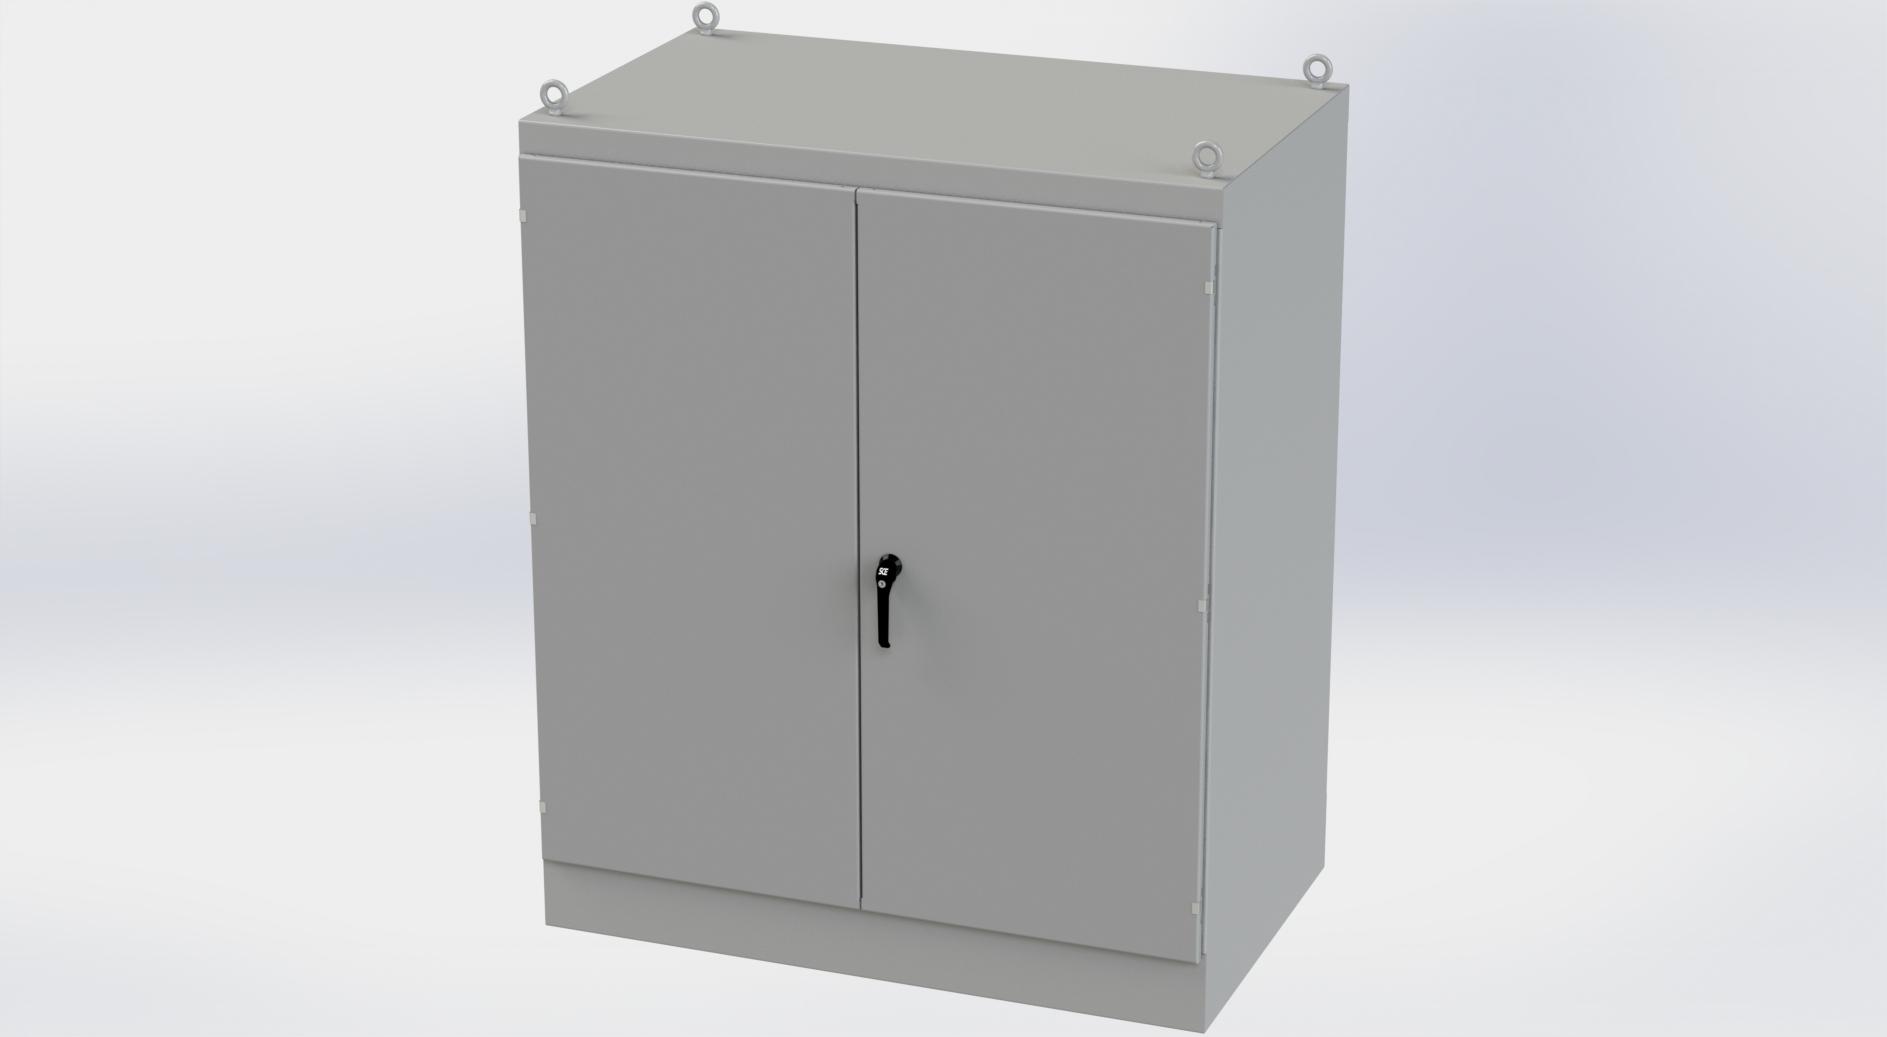 Saginaw Control SCE-726036FSDAD FSDAD Enclosure, Height:72.00", Width:60.00", Depth:36.00", ANSI-61 gray finish inside and out. Optional sub-panels are powder coated white.